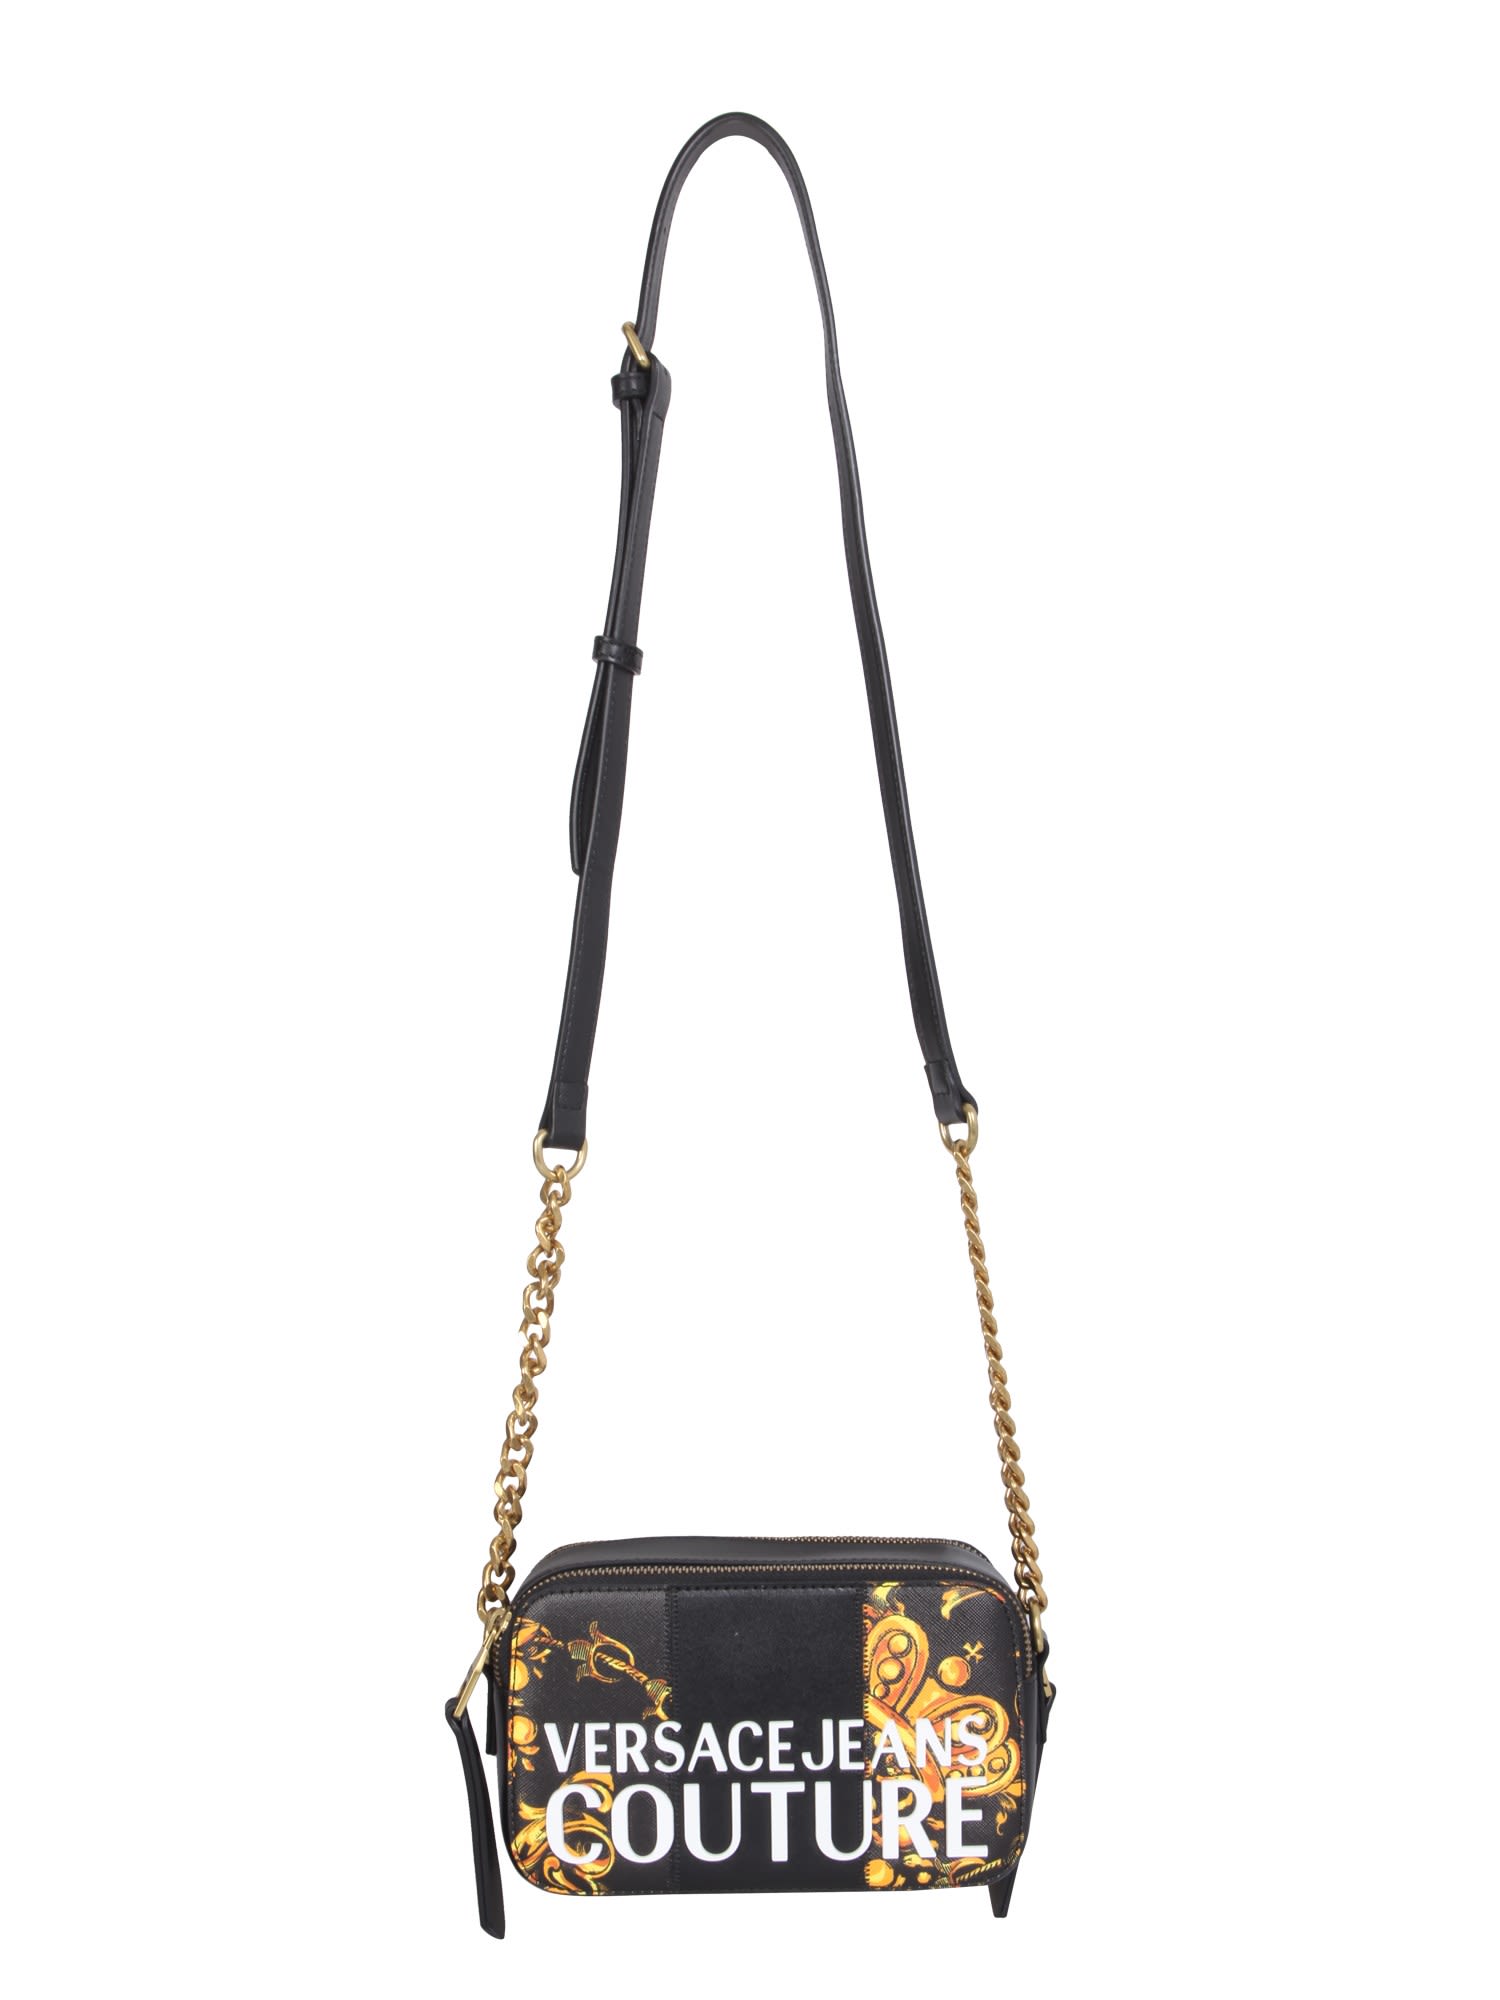 Versace Jeans Couture Eco Leather Shoulder Bag